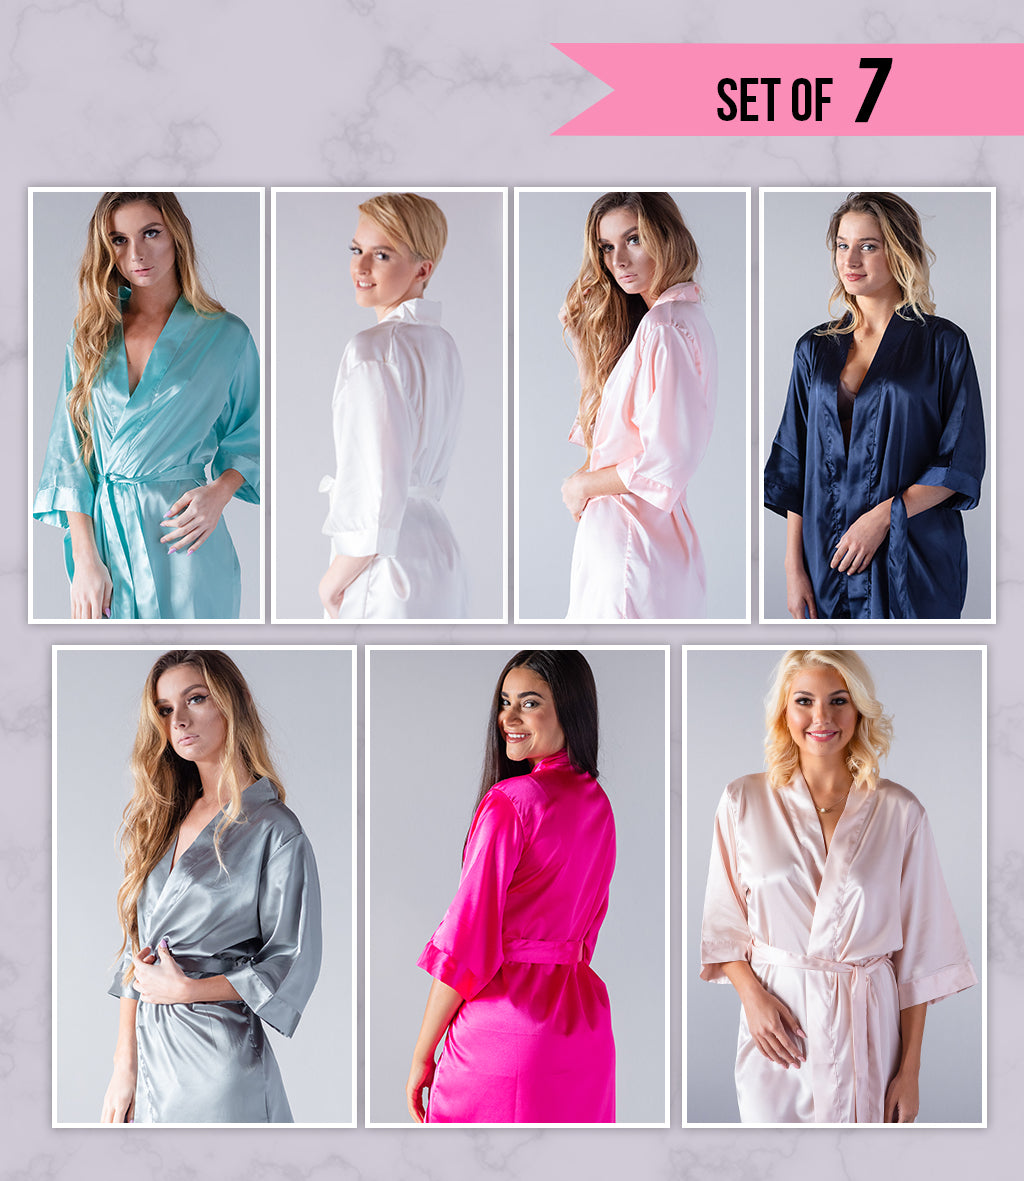 Set of 7 Robes - Plain, Floral, and Lace Robes